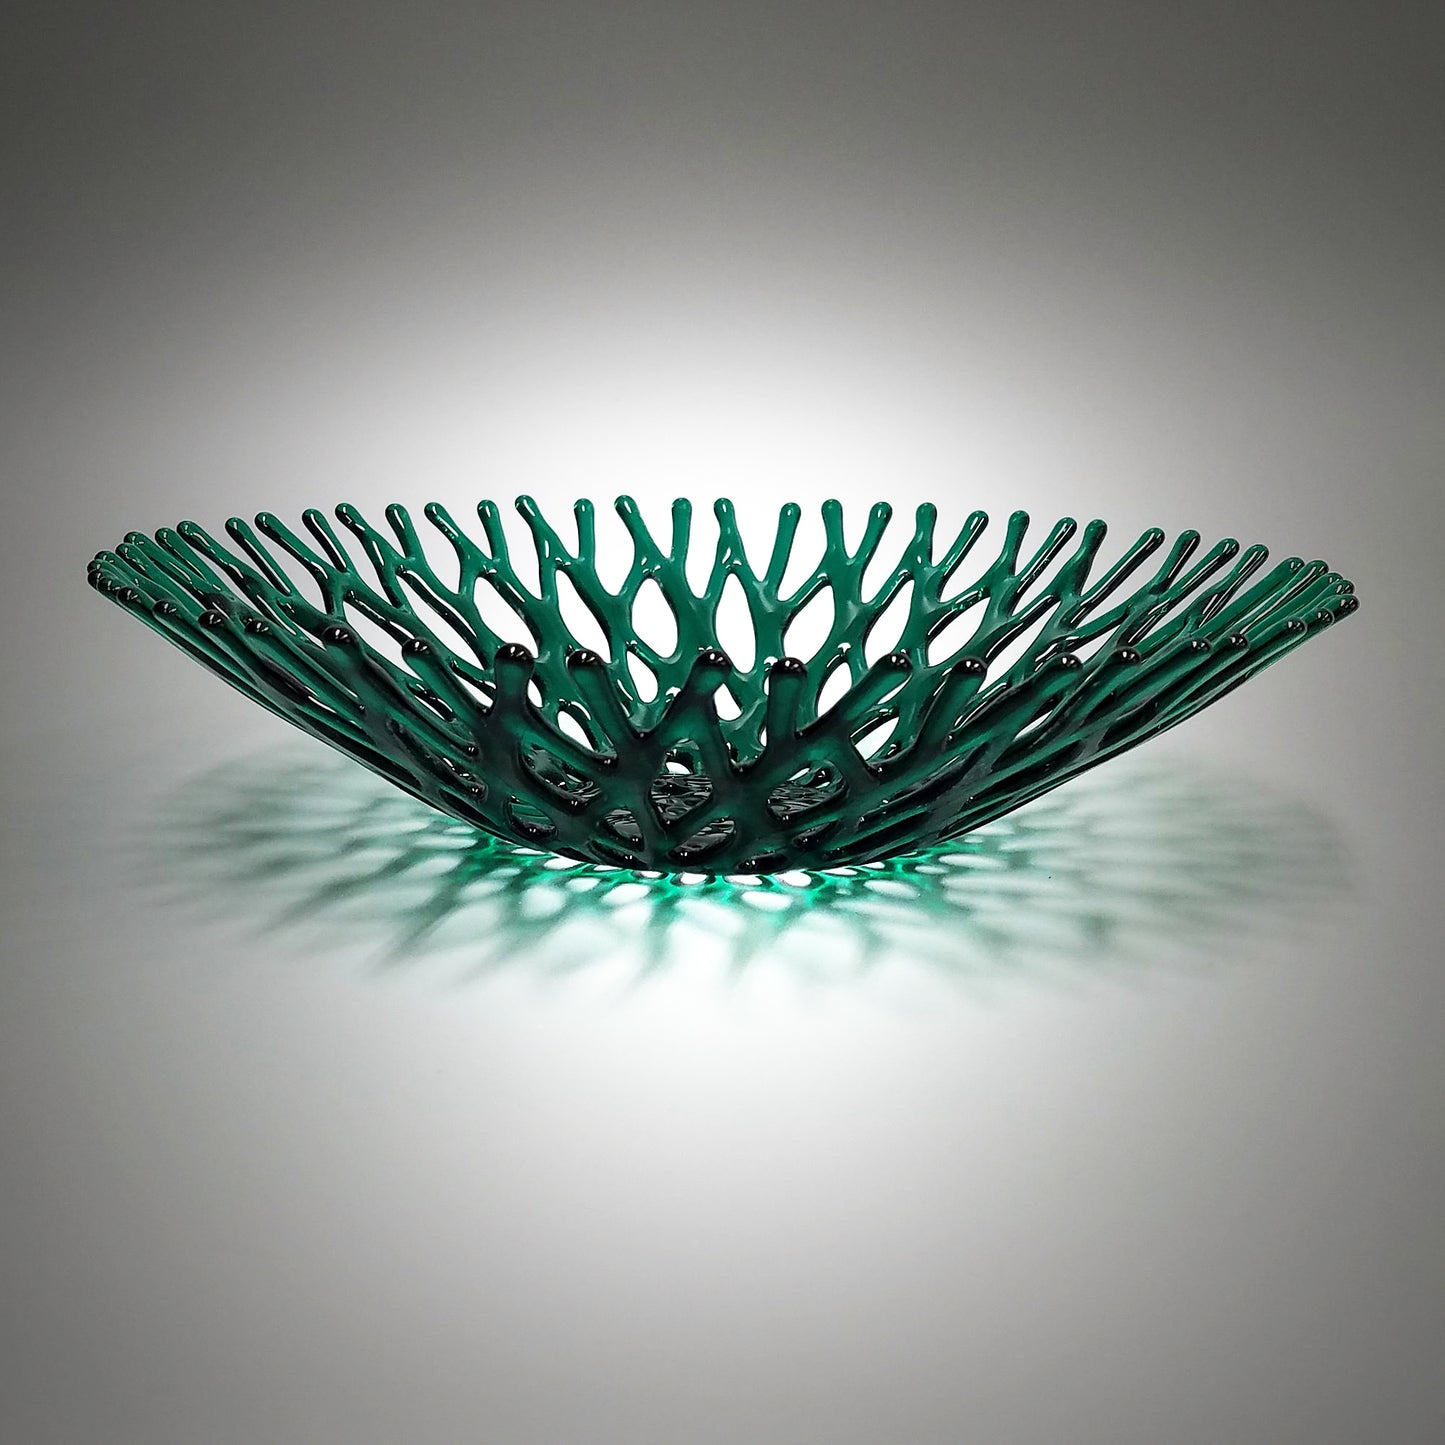 Fused Glass Art Fruit Bowl in Emerald Green